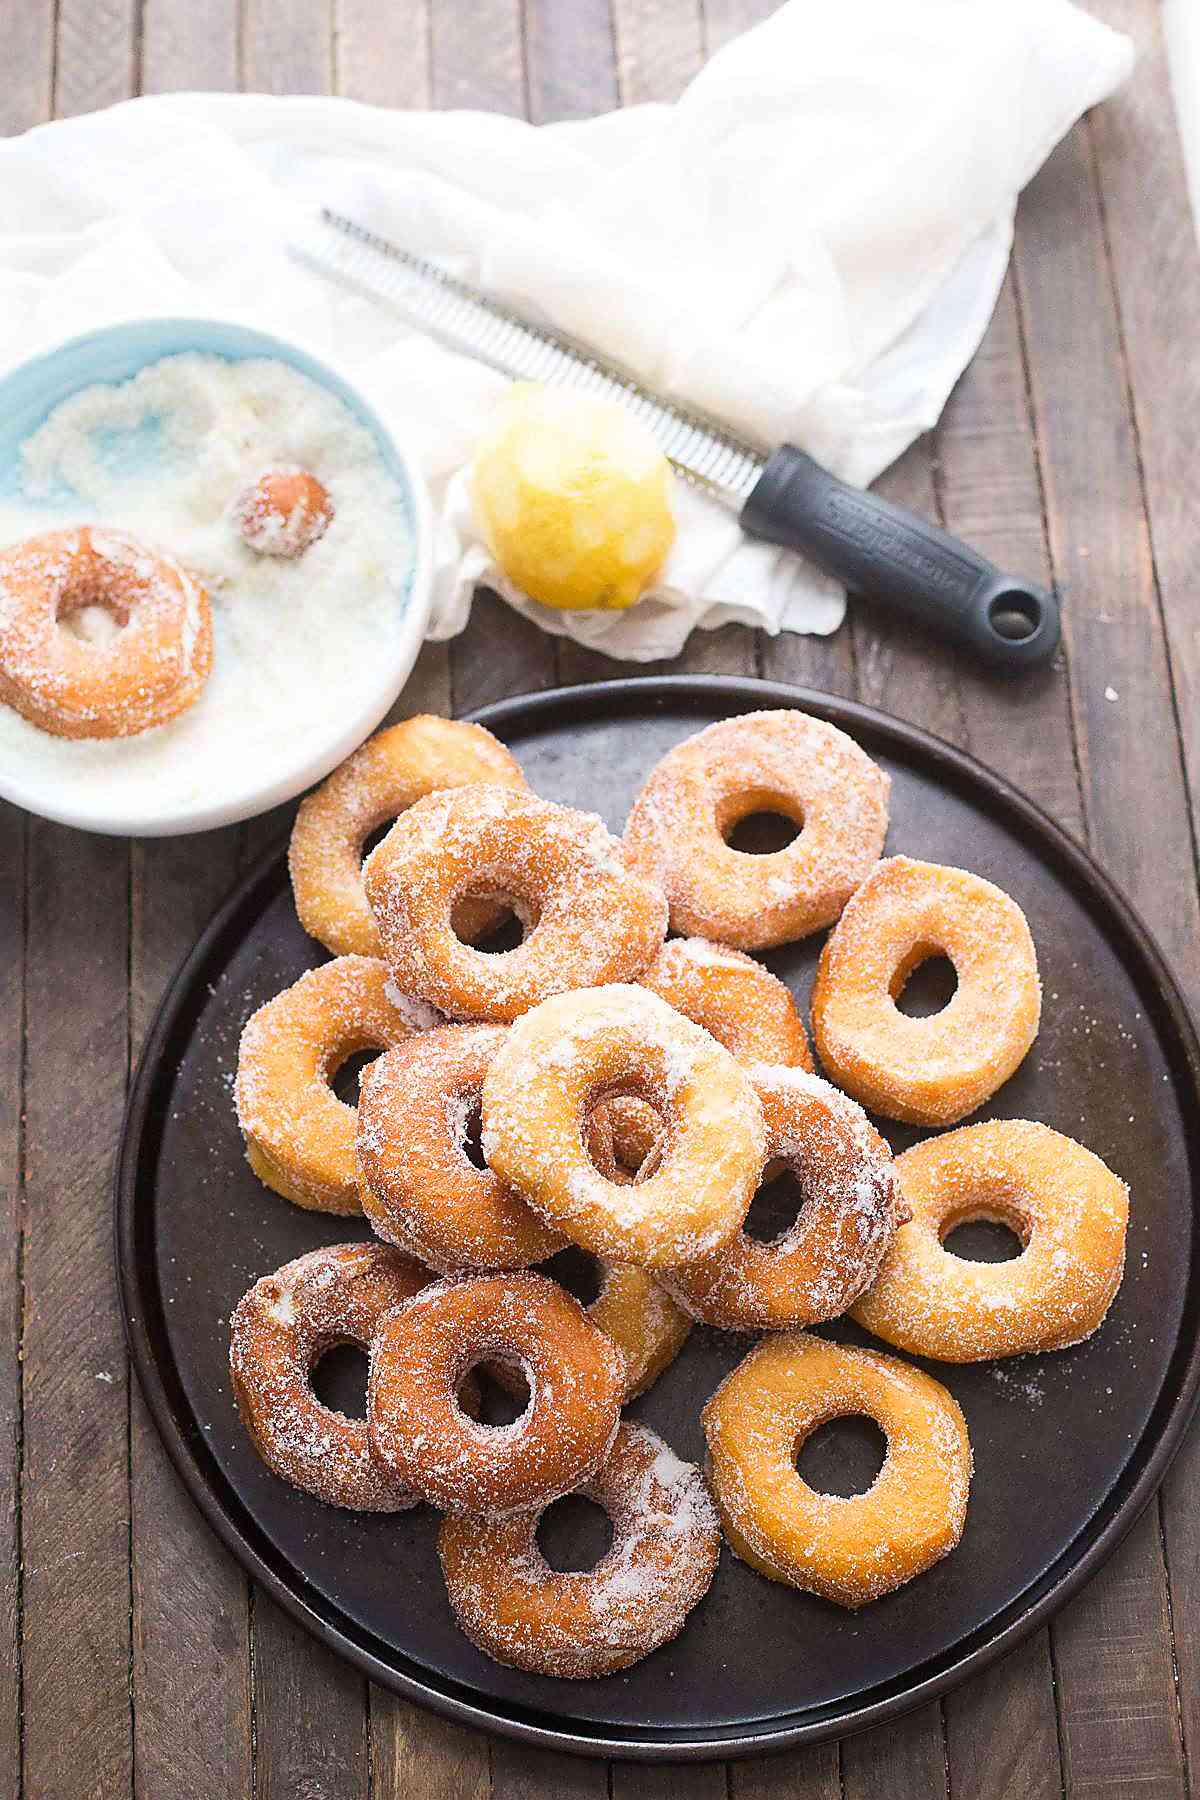 Biscuit donuts are lightly fried then coated in a simple lemon sugar mixture!